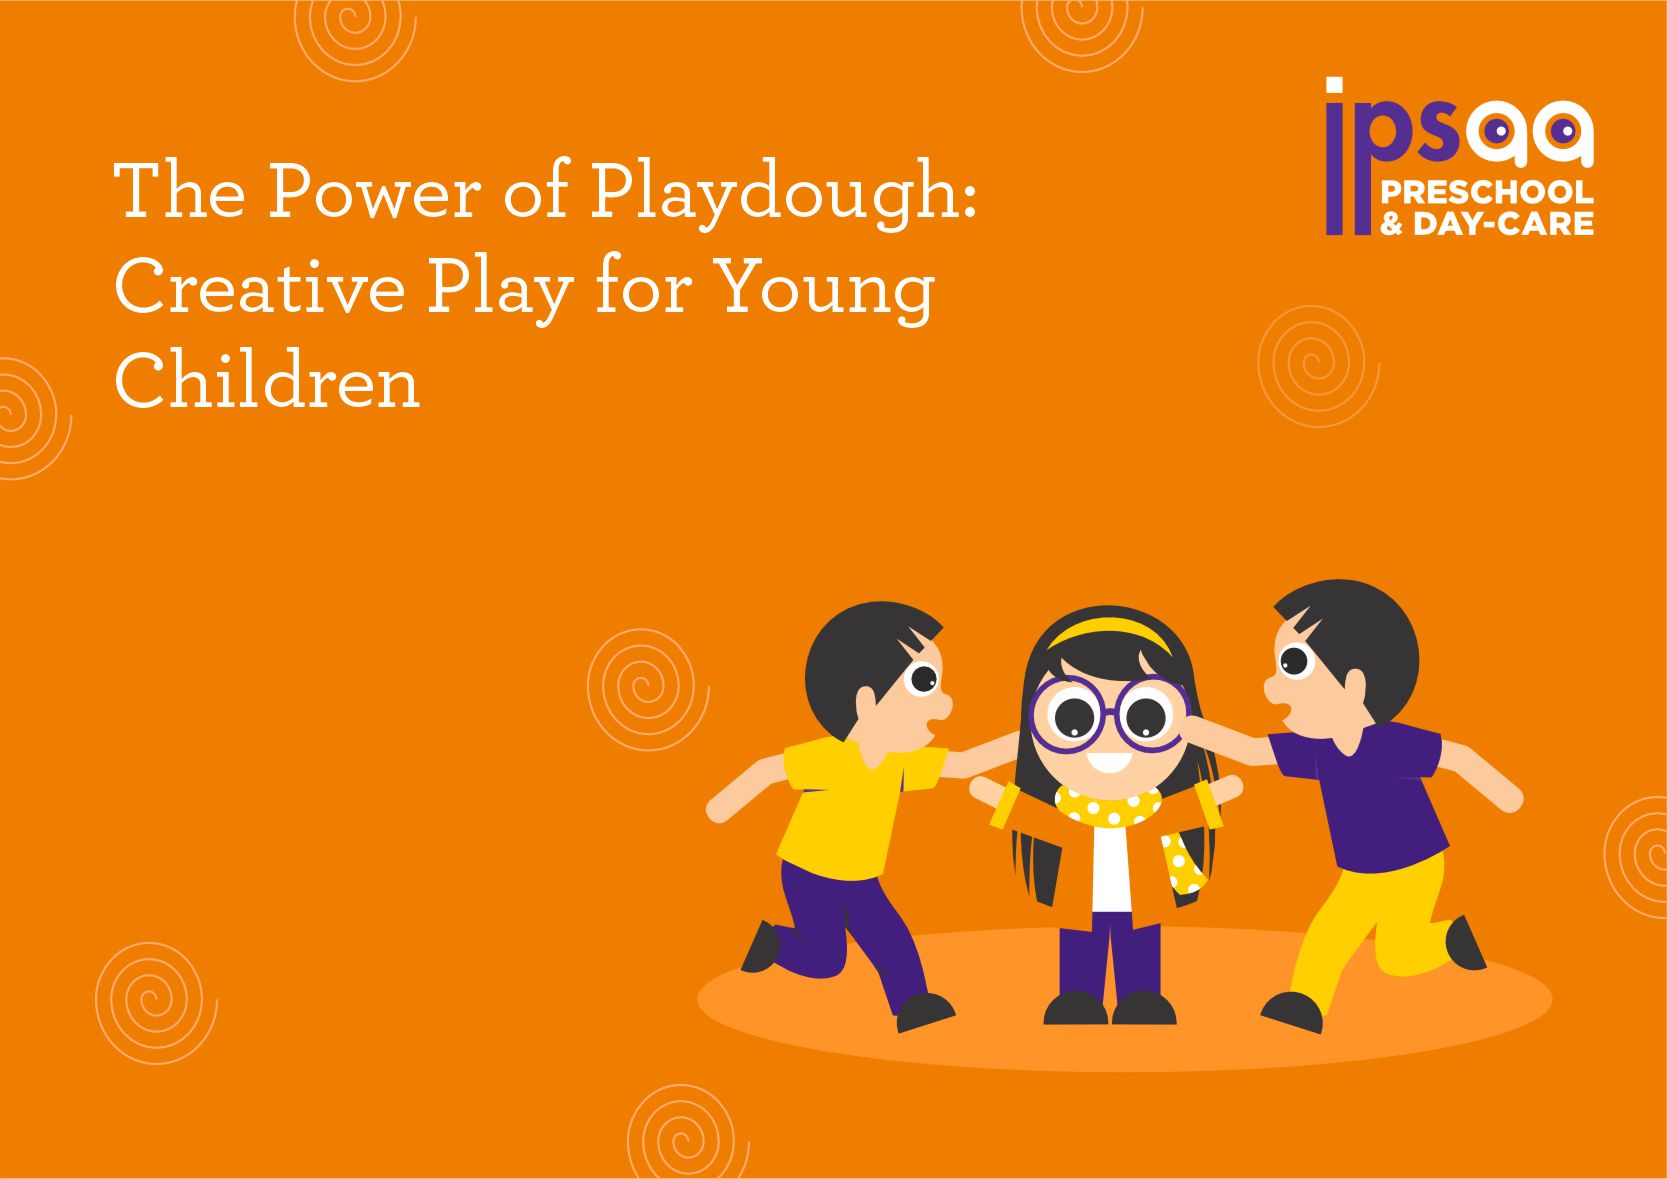 The Power of Playdough: Creative Play for Young Children